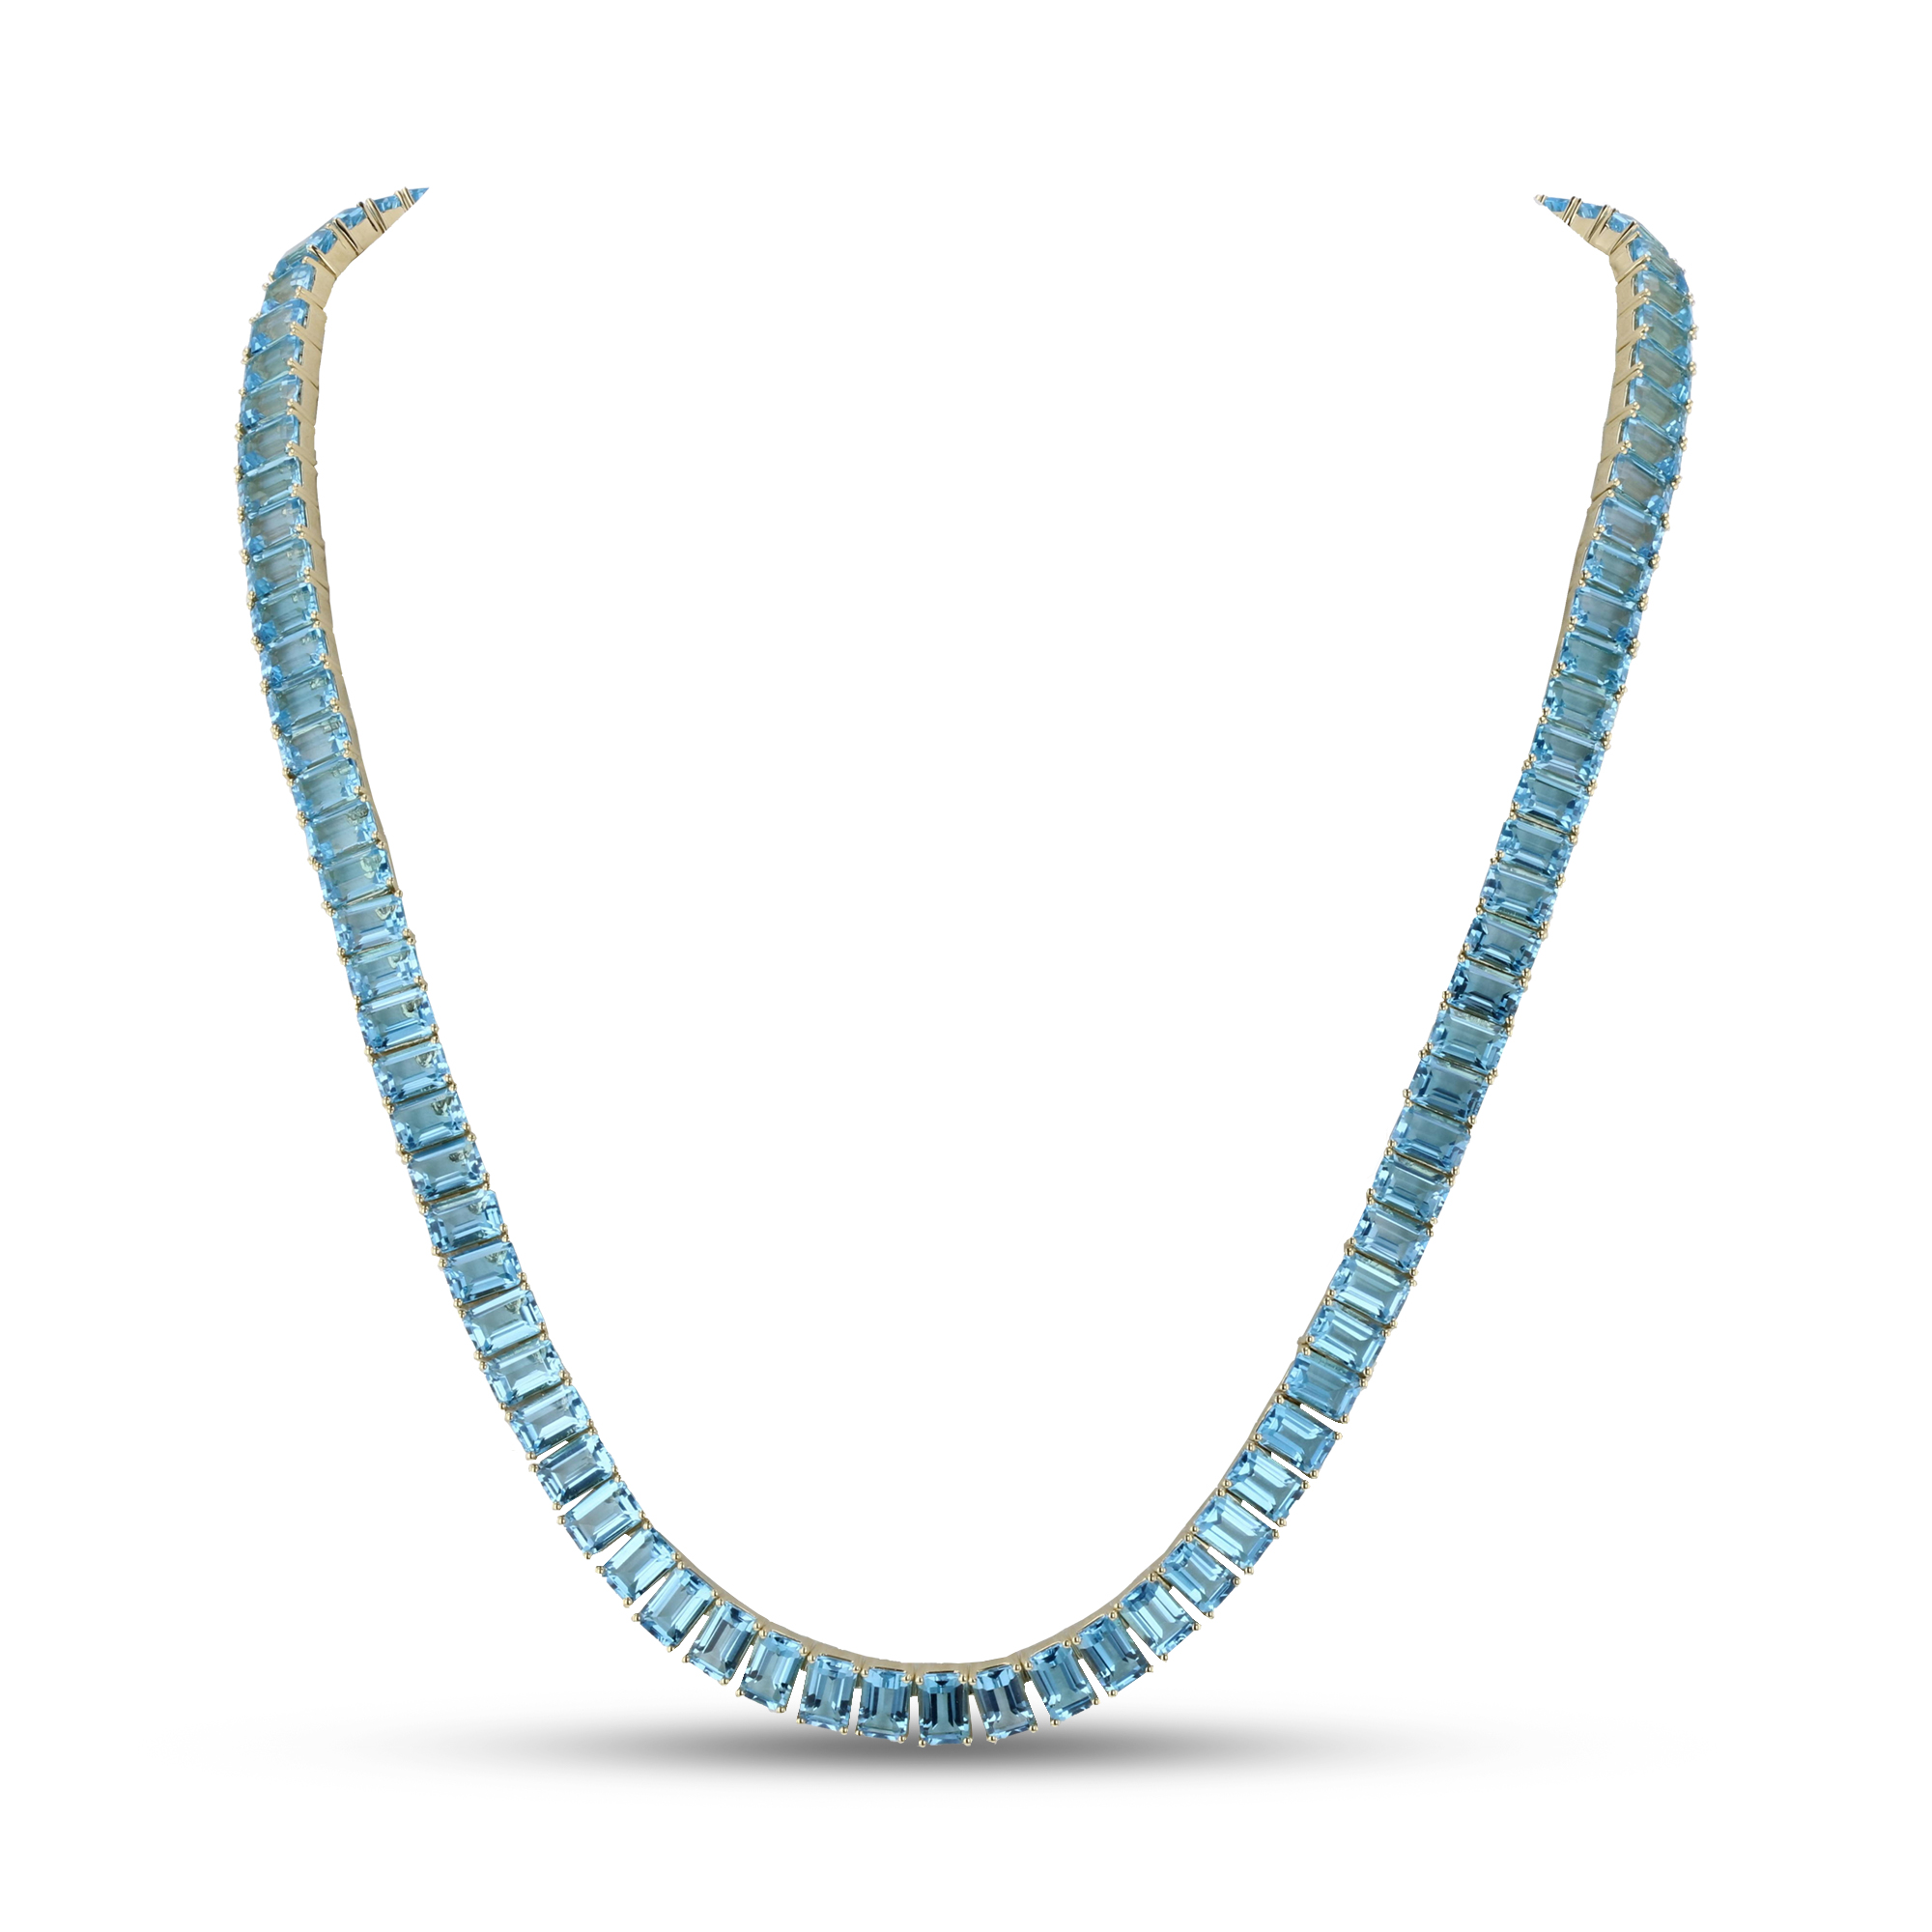 View 74ctw Emerald Cut Blue Topaz Necklace in 14k Yellow Gold 